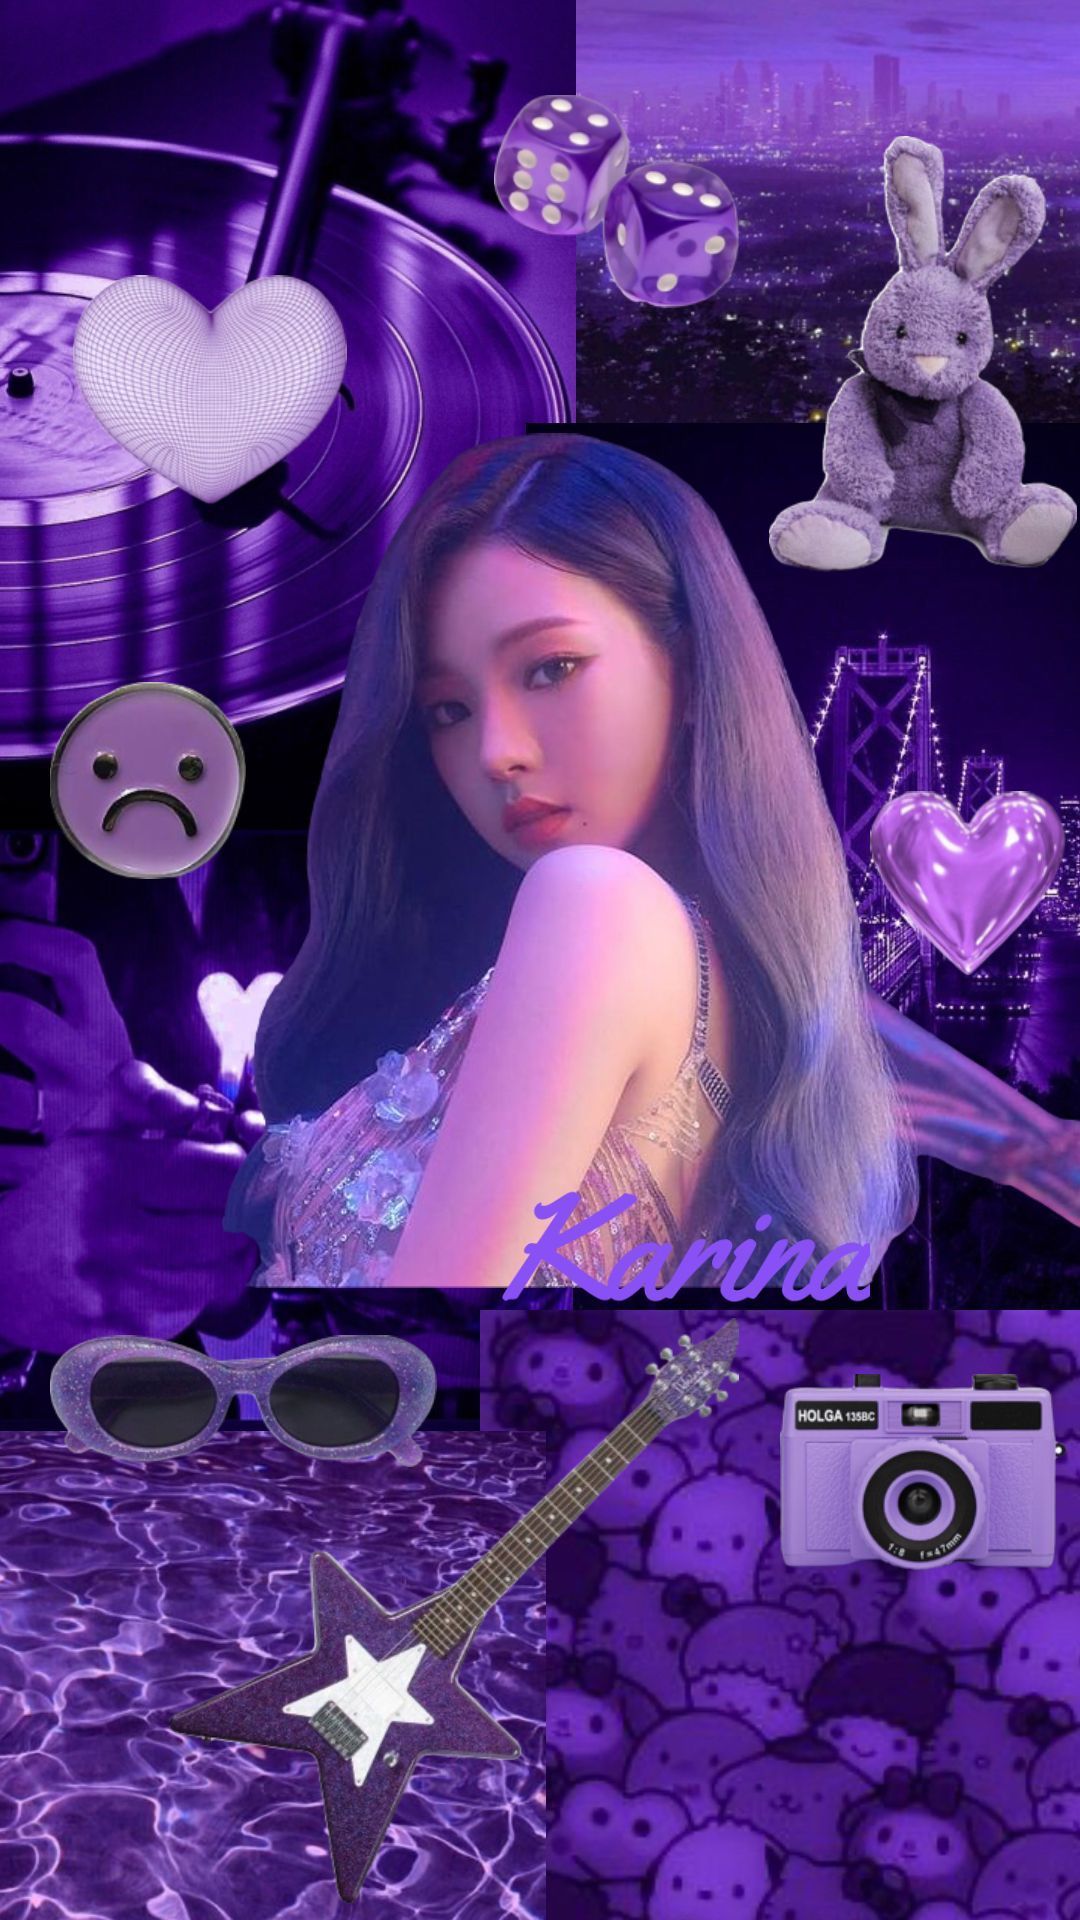 IPhone wallpaper of Rosé from BLACKPINK with purple and black aesthetic. - Aespa